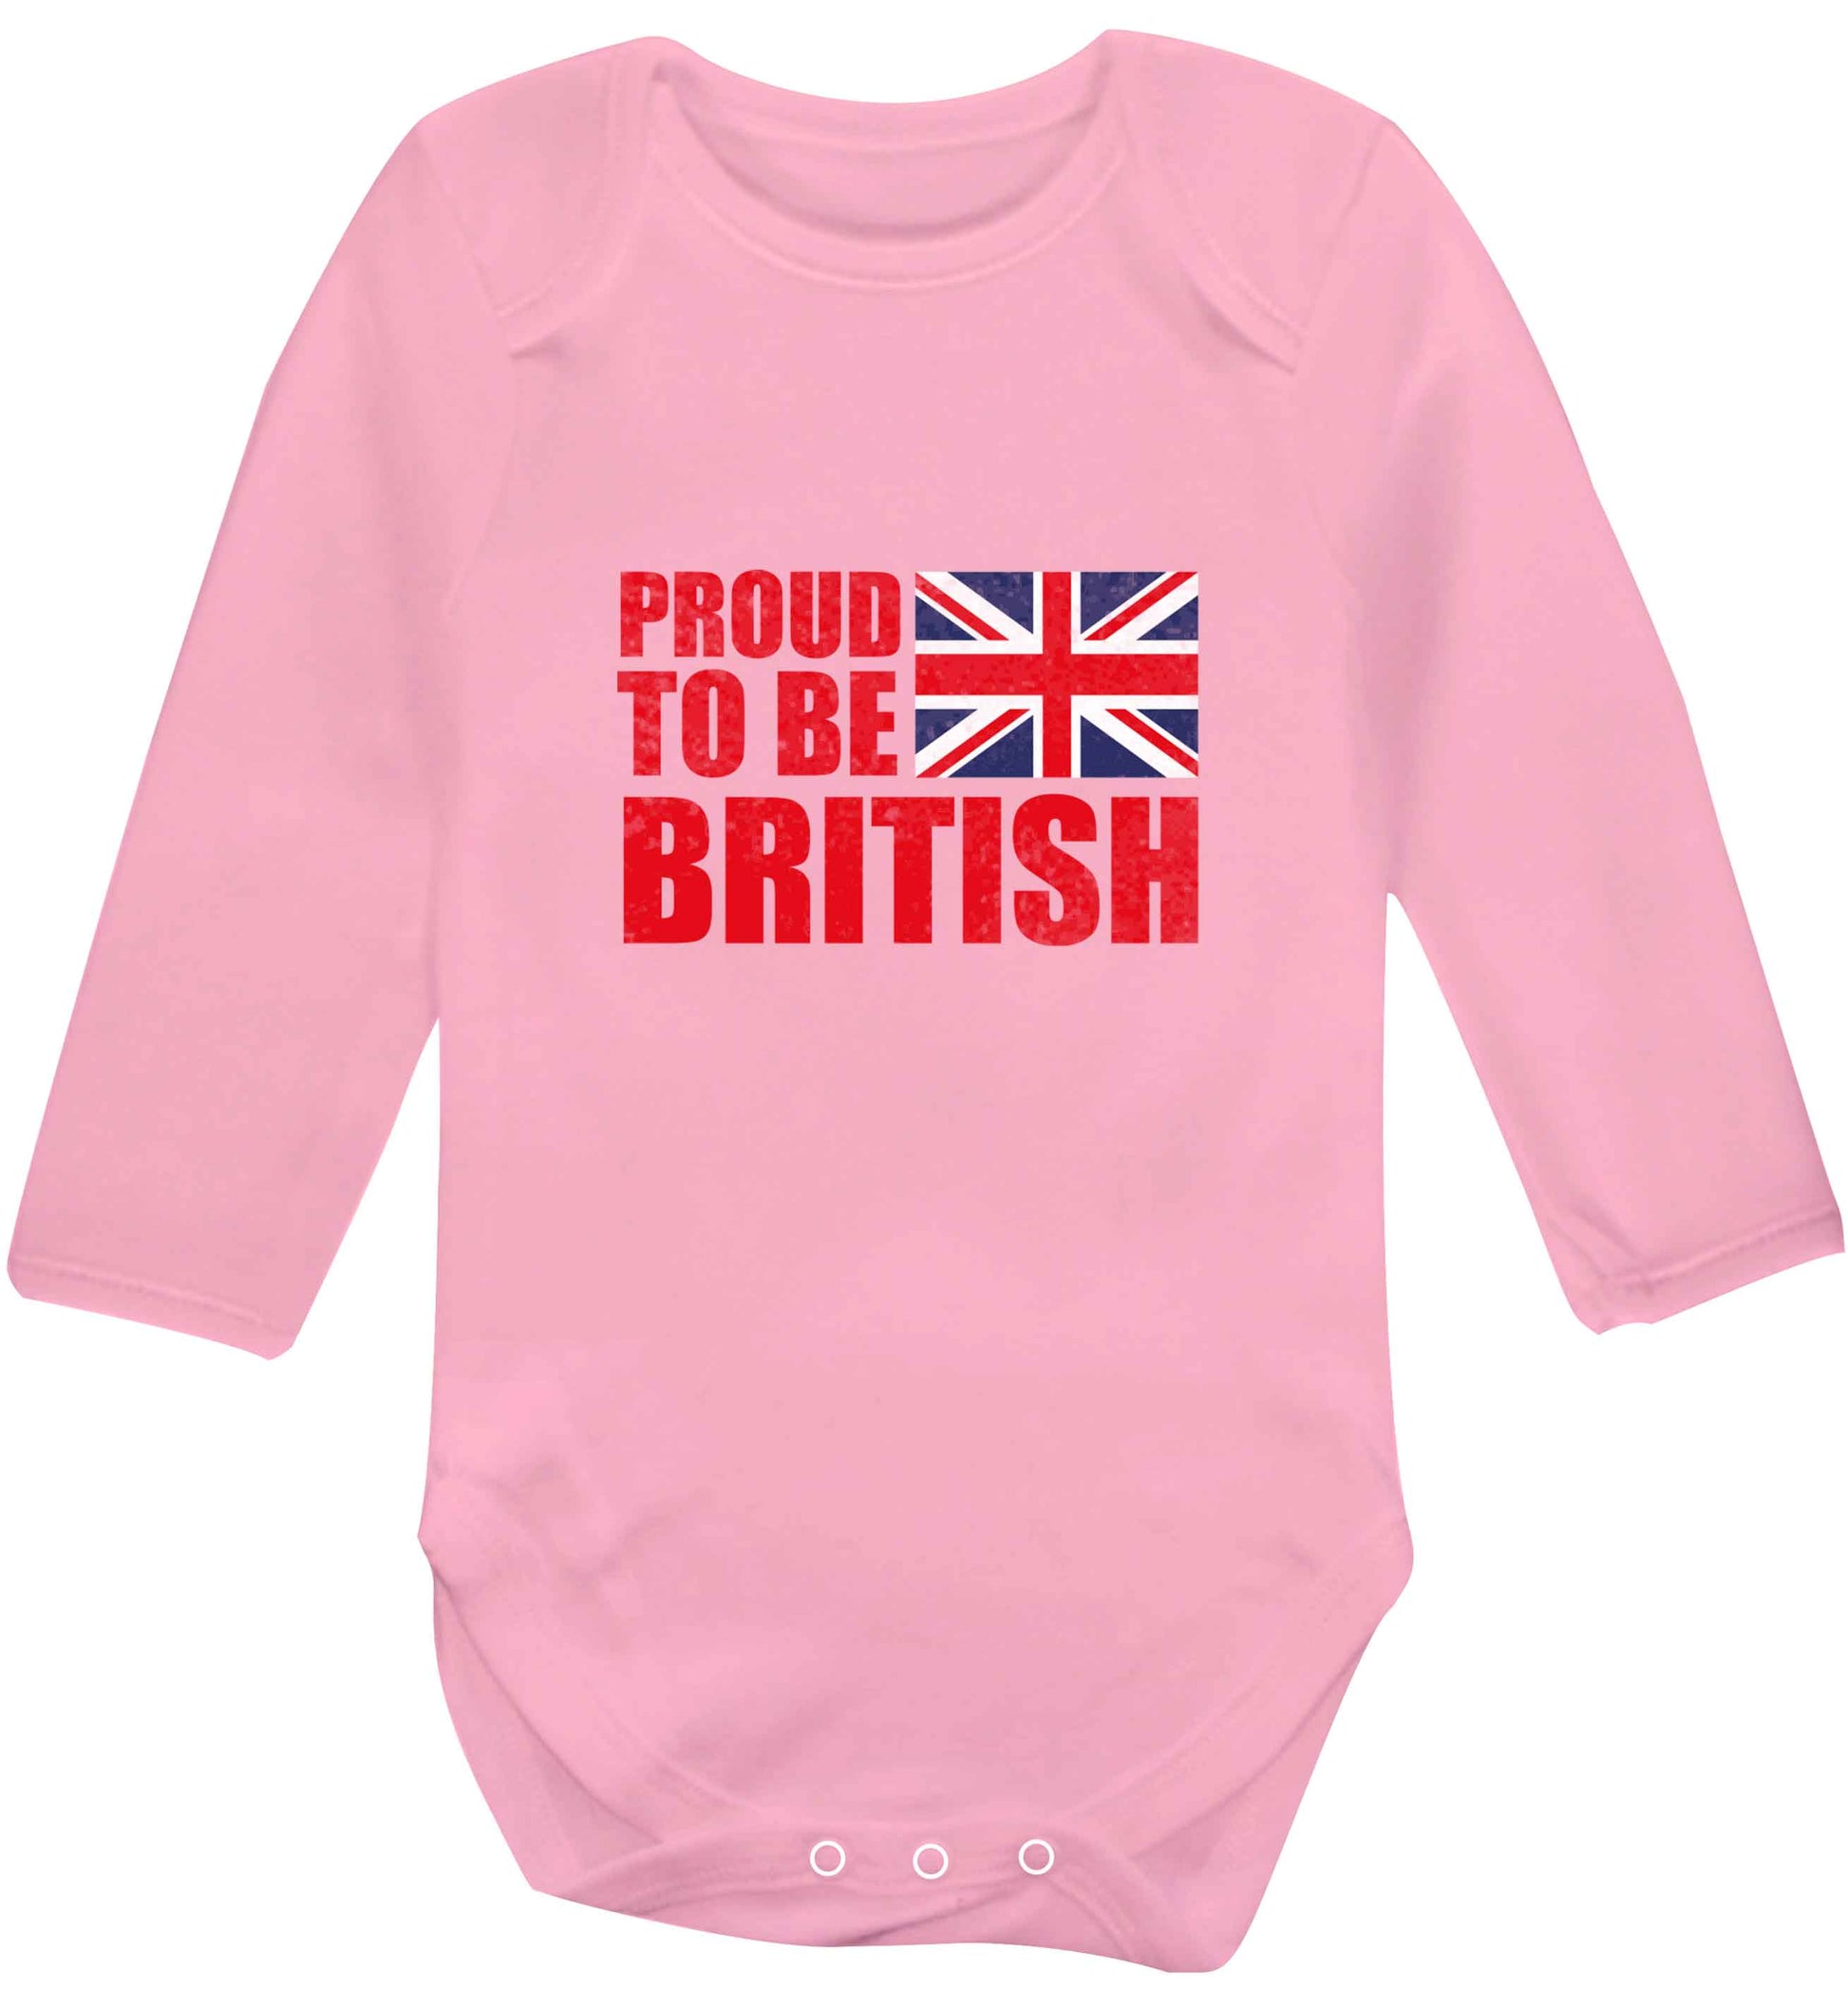 Proud to be British baby vest long sleeved pale pink 6-12 months